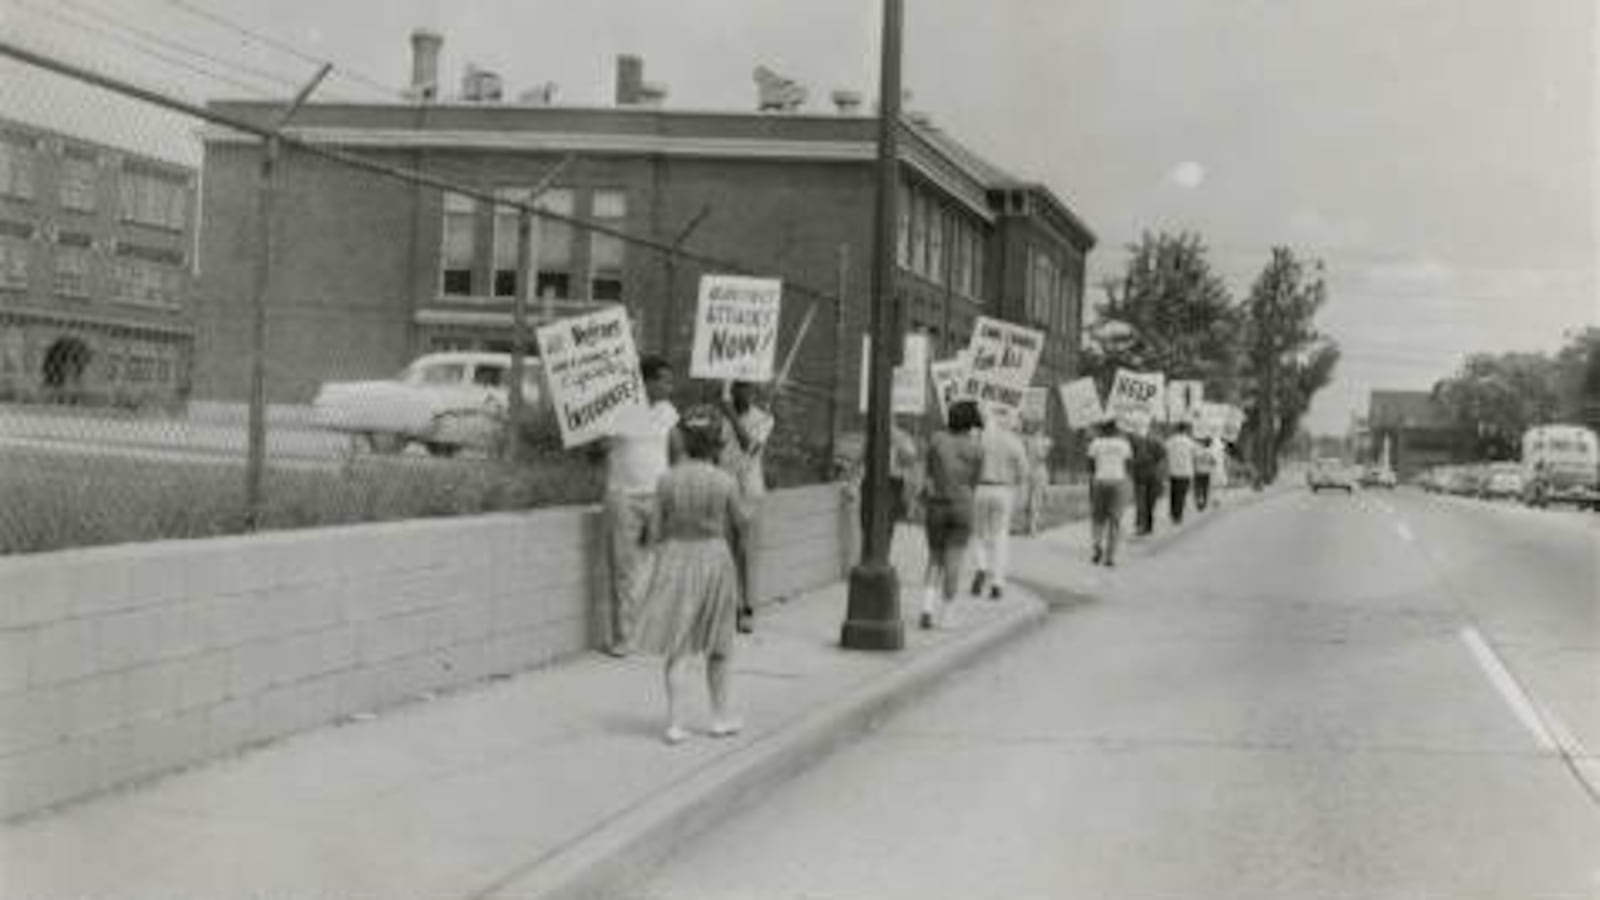 Protestors carried signs asking for school redistricting and integration. They were on the sidewalk in front of IPS School 17 in the 1960s.